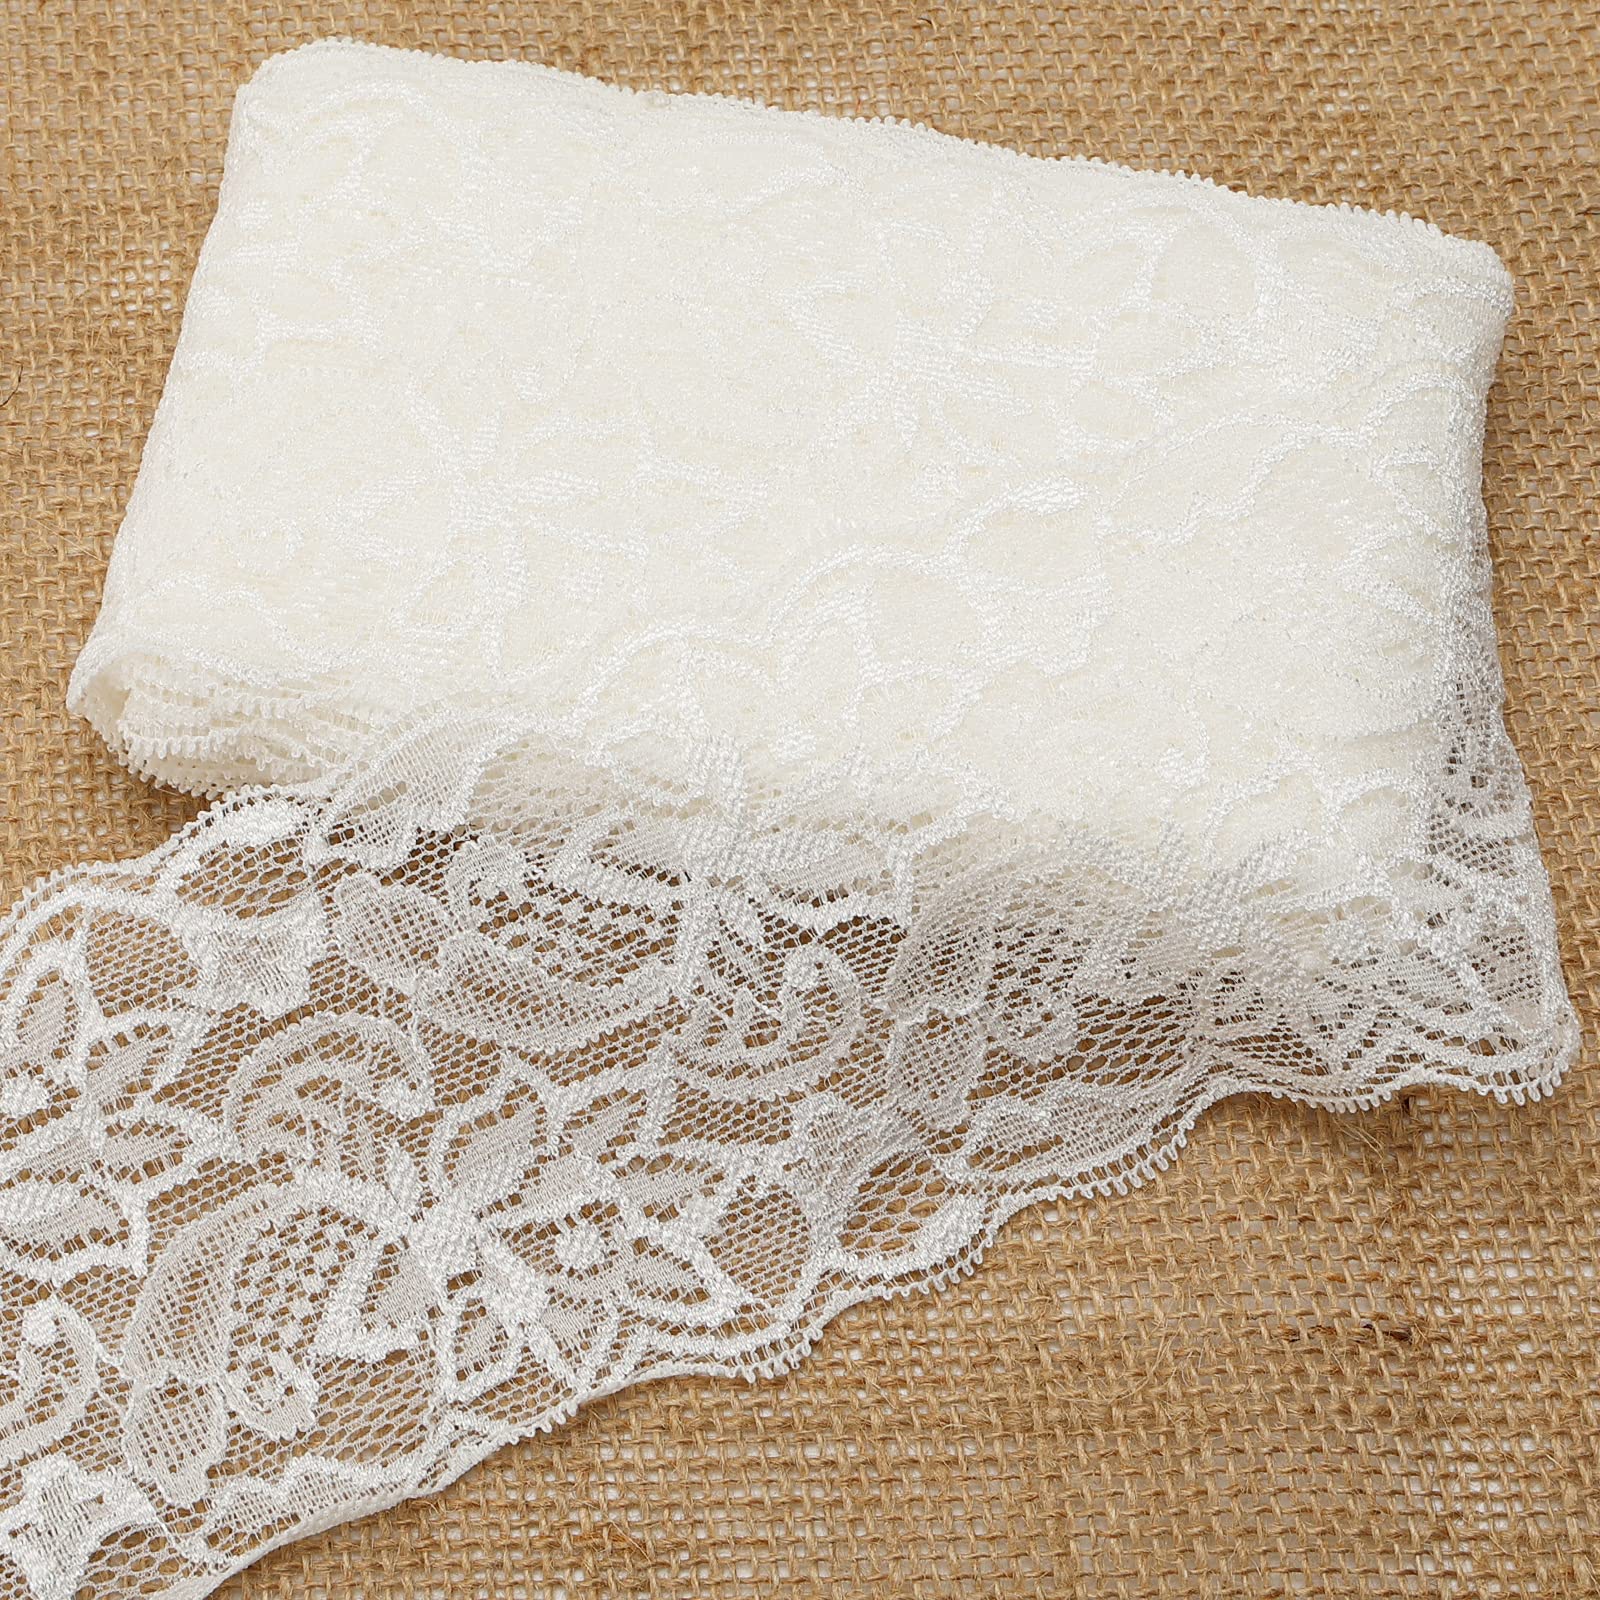  7 Wide Lace Fabric Sewing Lace Ribbon Trim Elastic